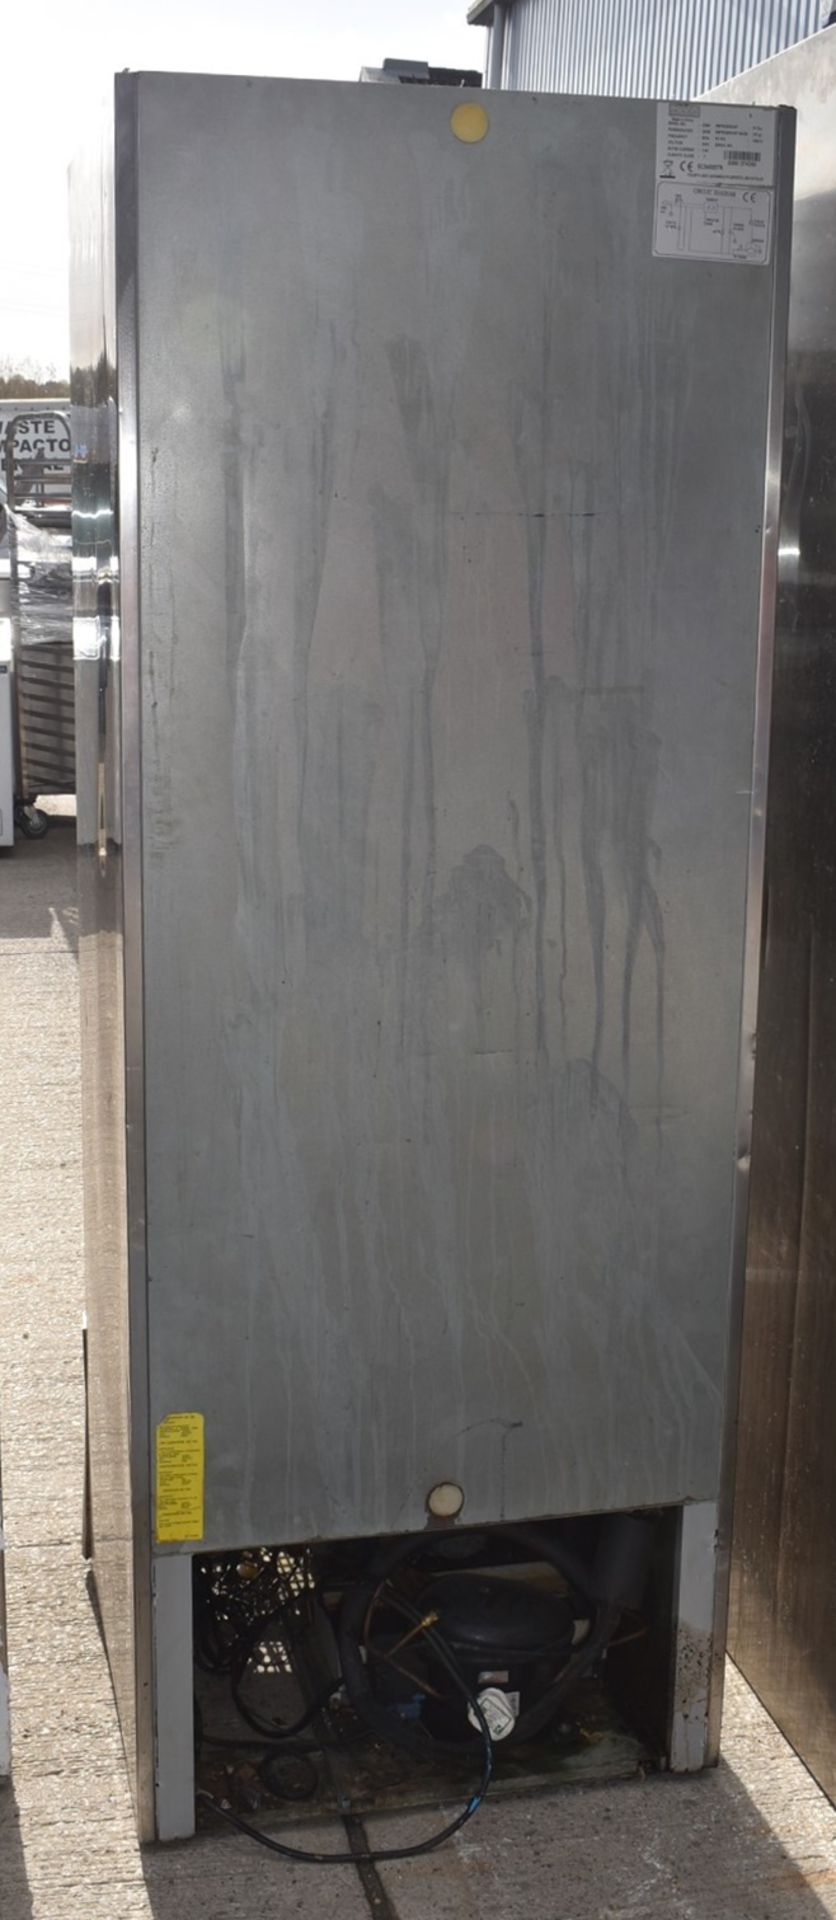 1 x Polar G590 Upright Commercial Fridge - Size: H188 x W65 x D70 cms - Recently Removed From a Dark - Image 4 of 6